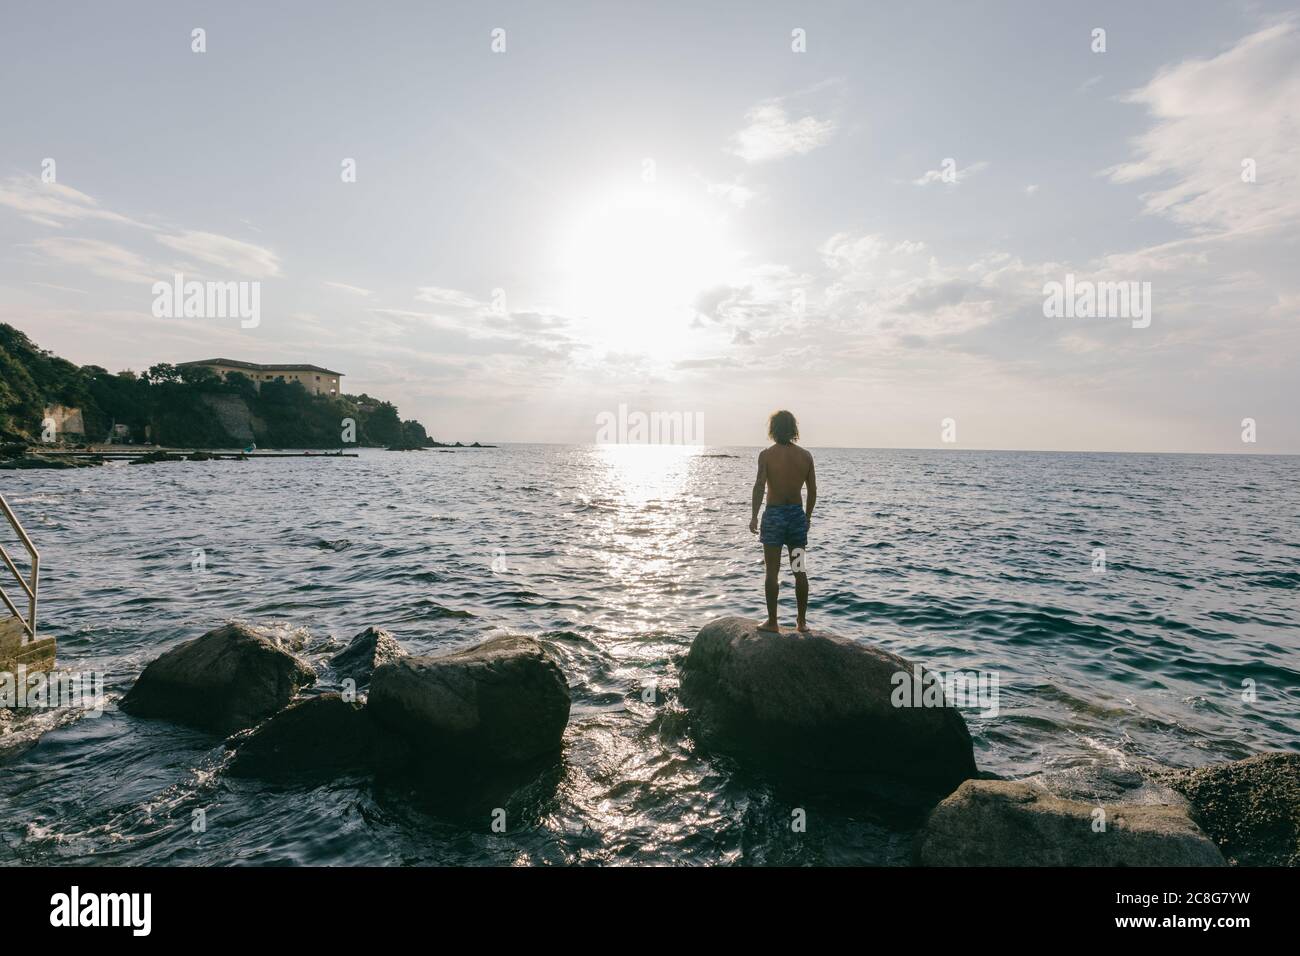 Man standing on rock in sea Stock Photo